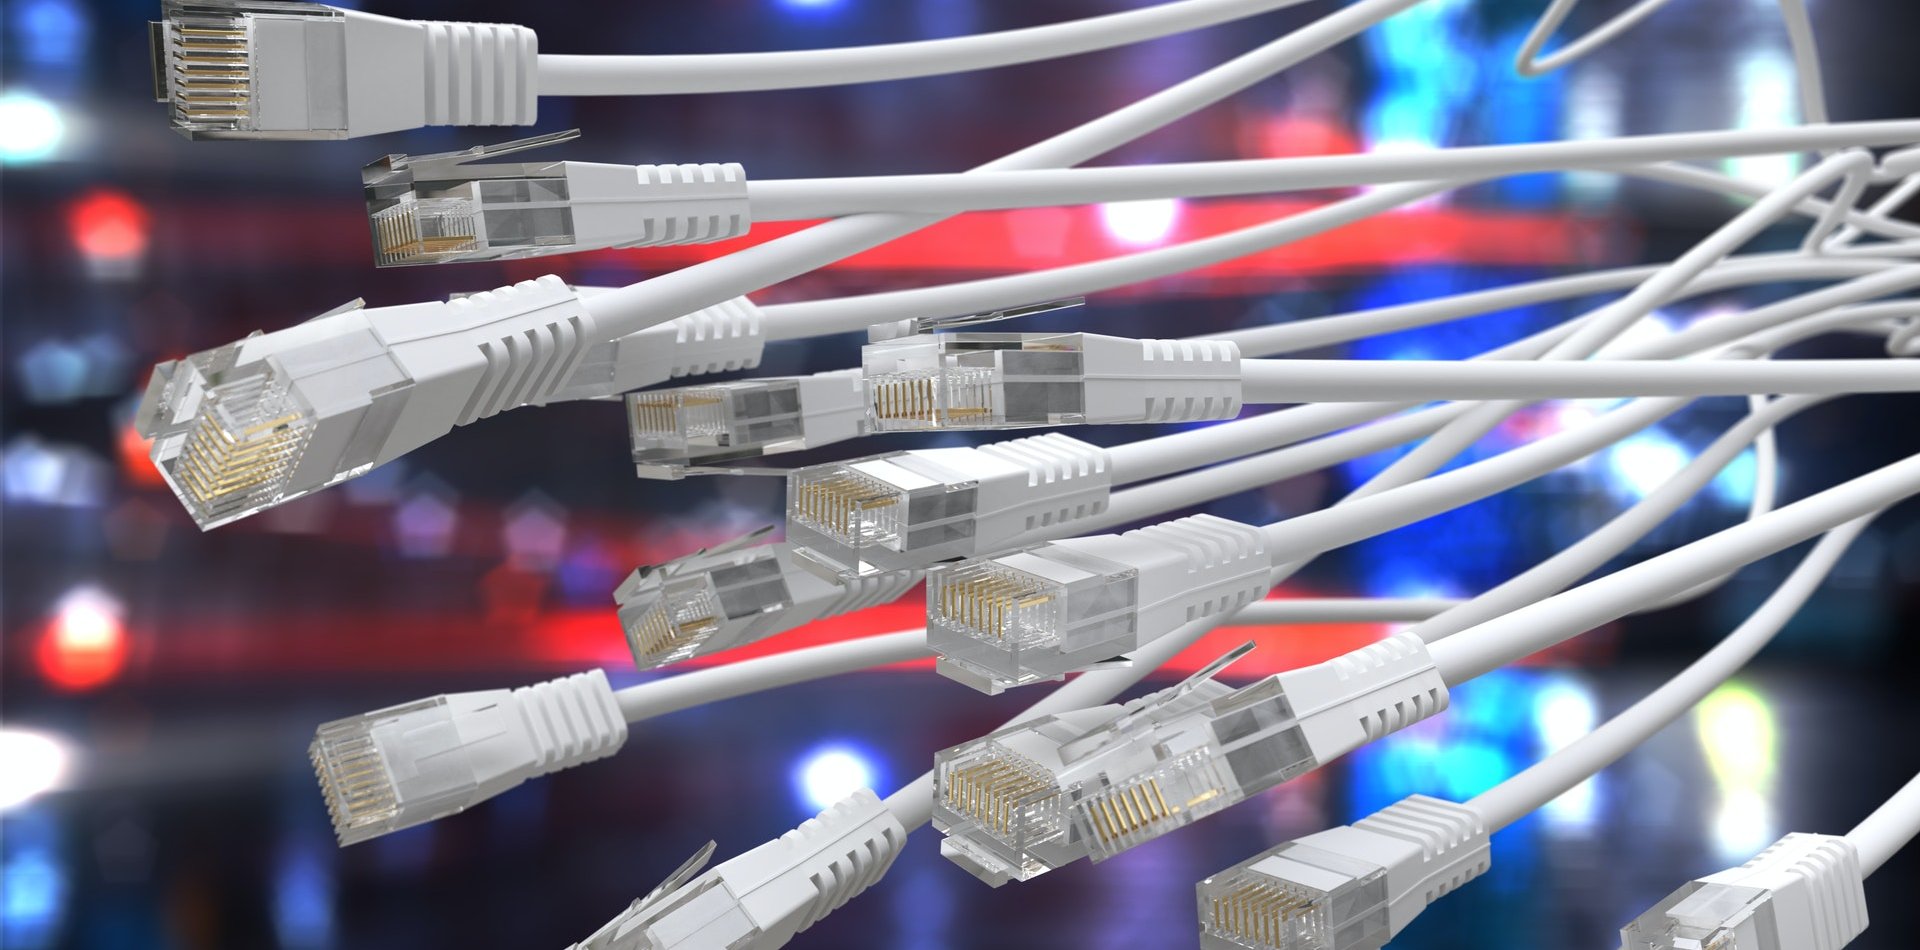 Router wires